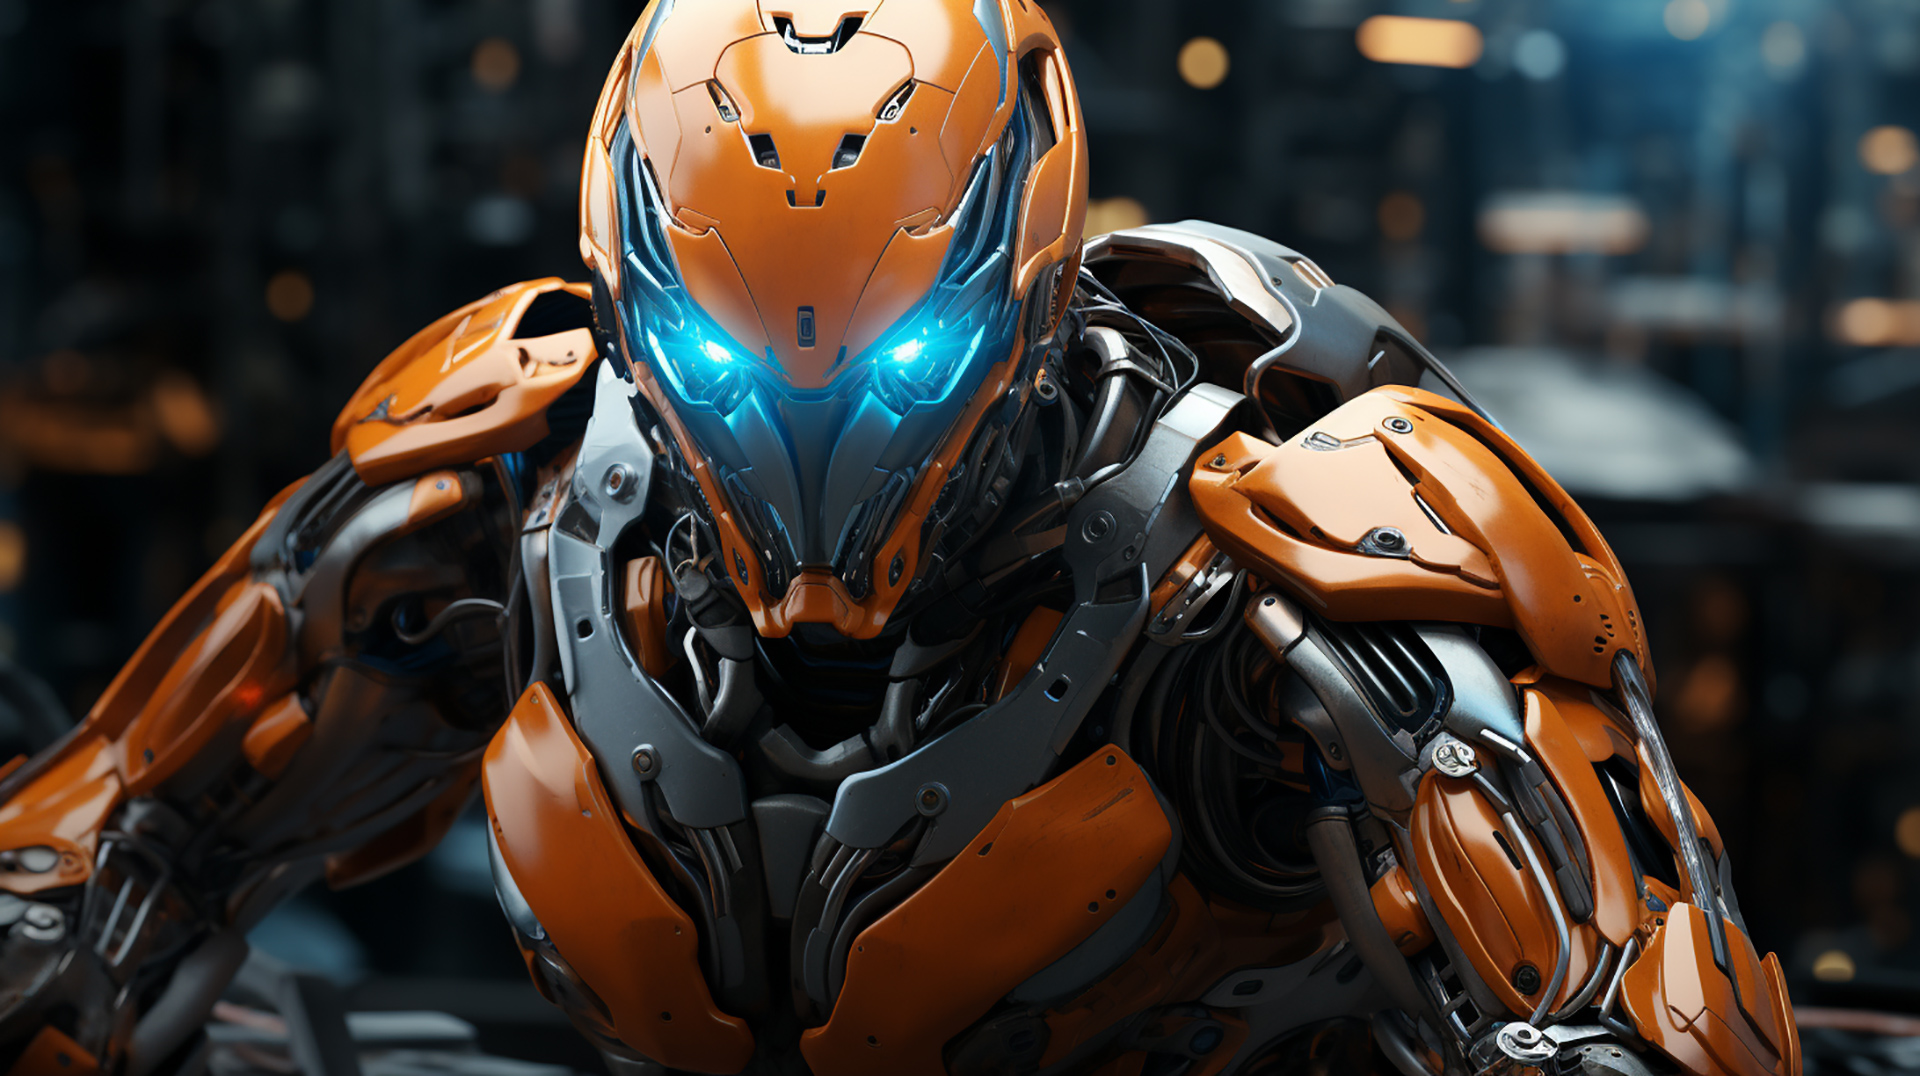 Robotic Marvels Unleashed - PC Wallpapers for Download